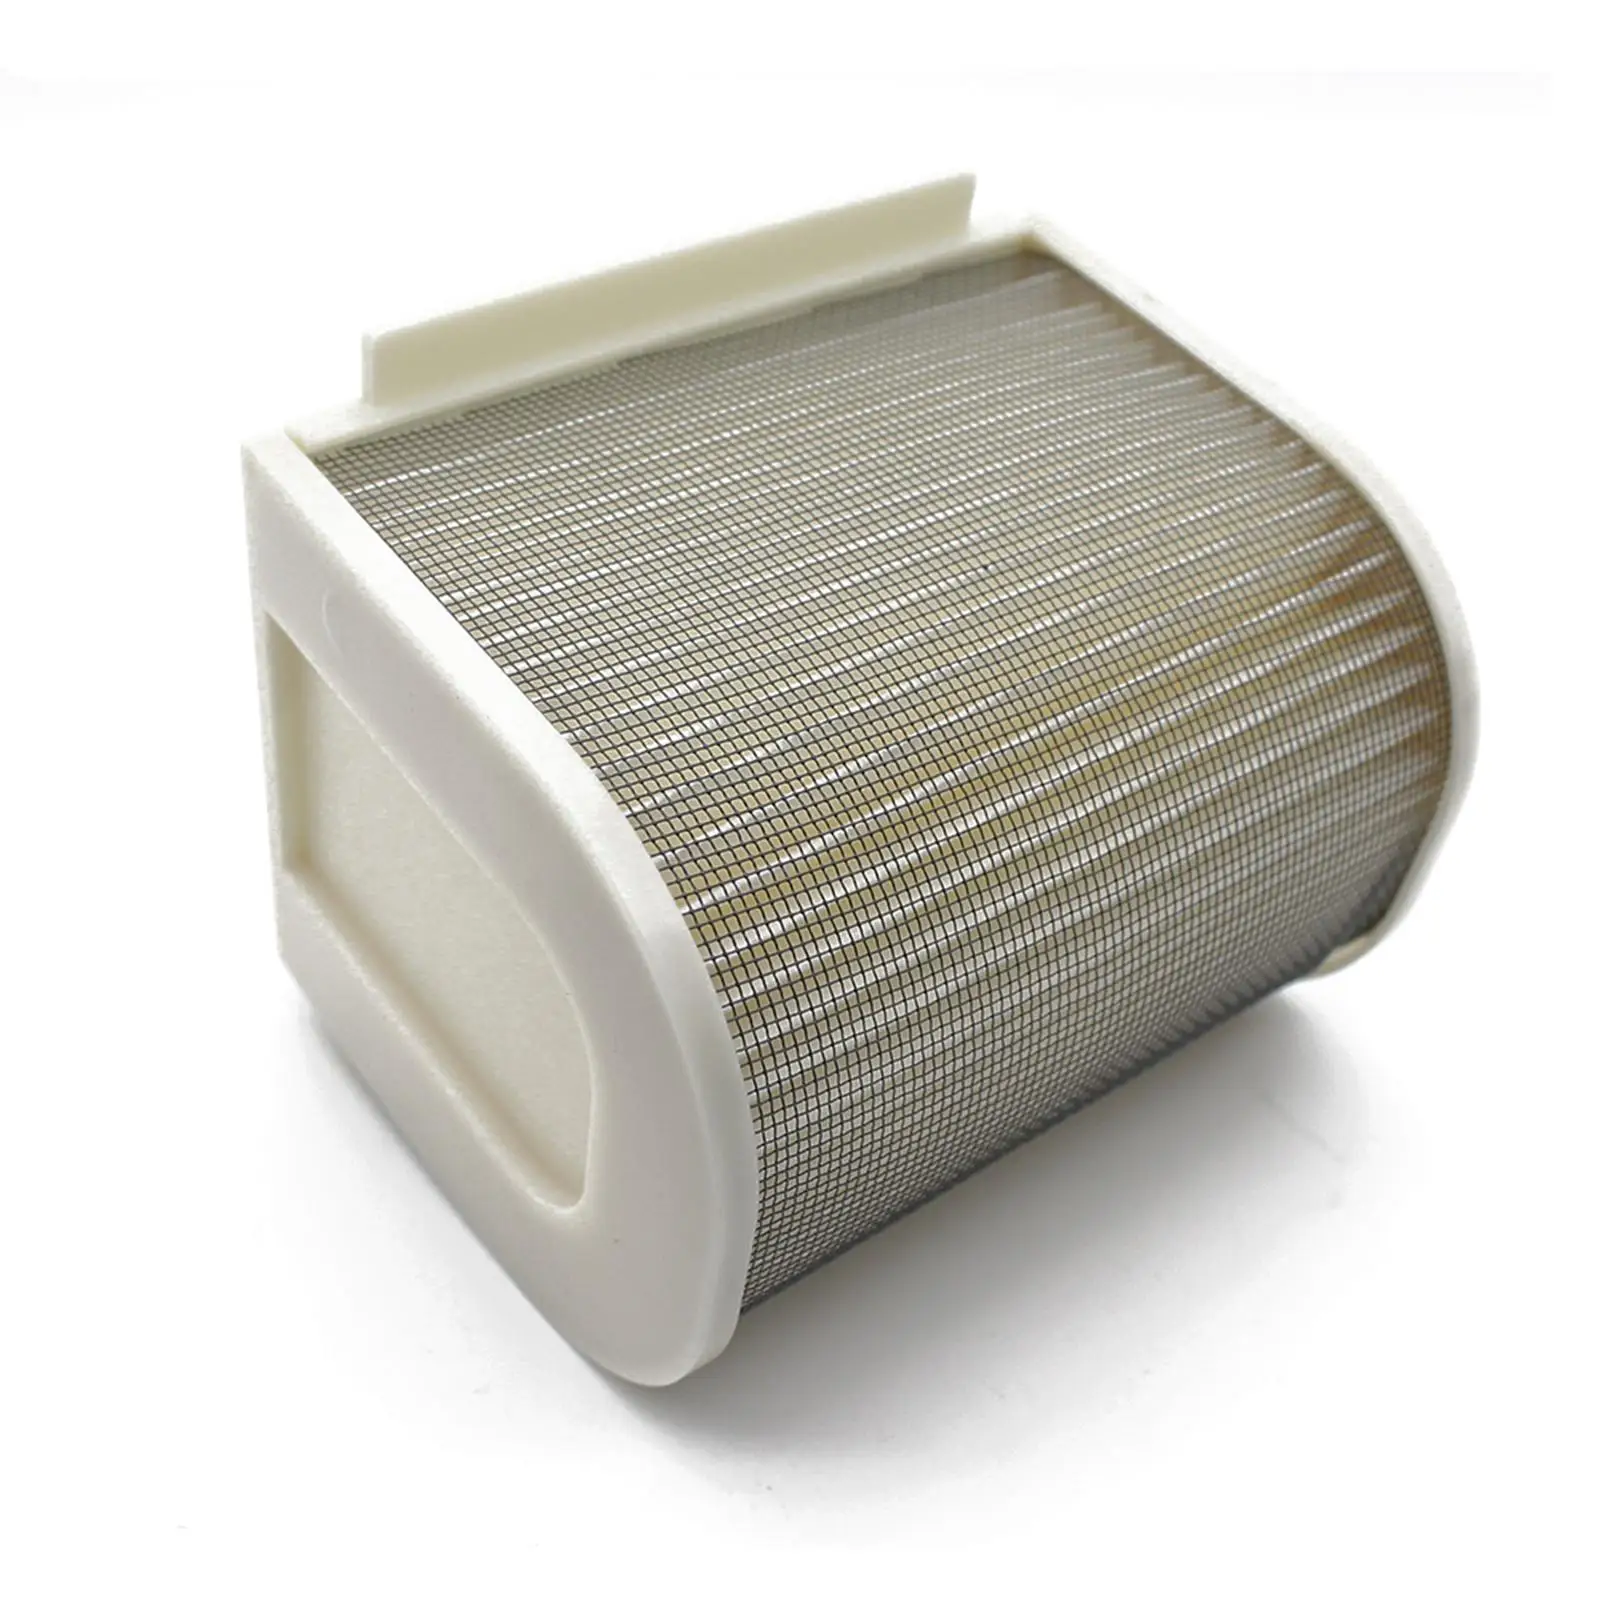 Motorcycle Air Filter for Yamaha XJR1300 SP 1999-2001 Accessory Durable